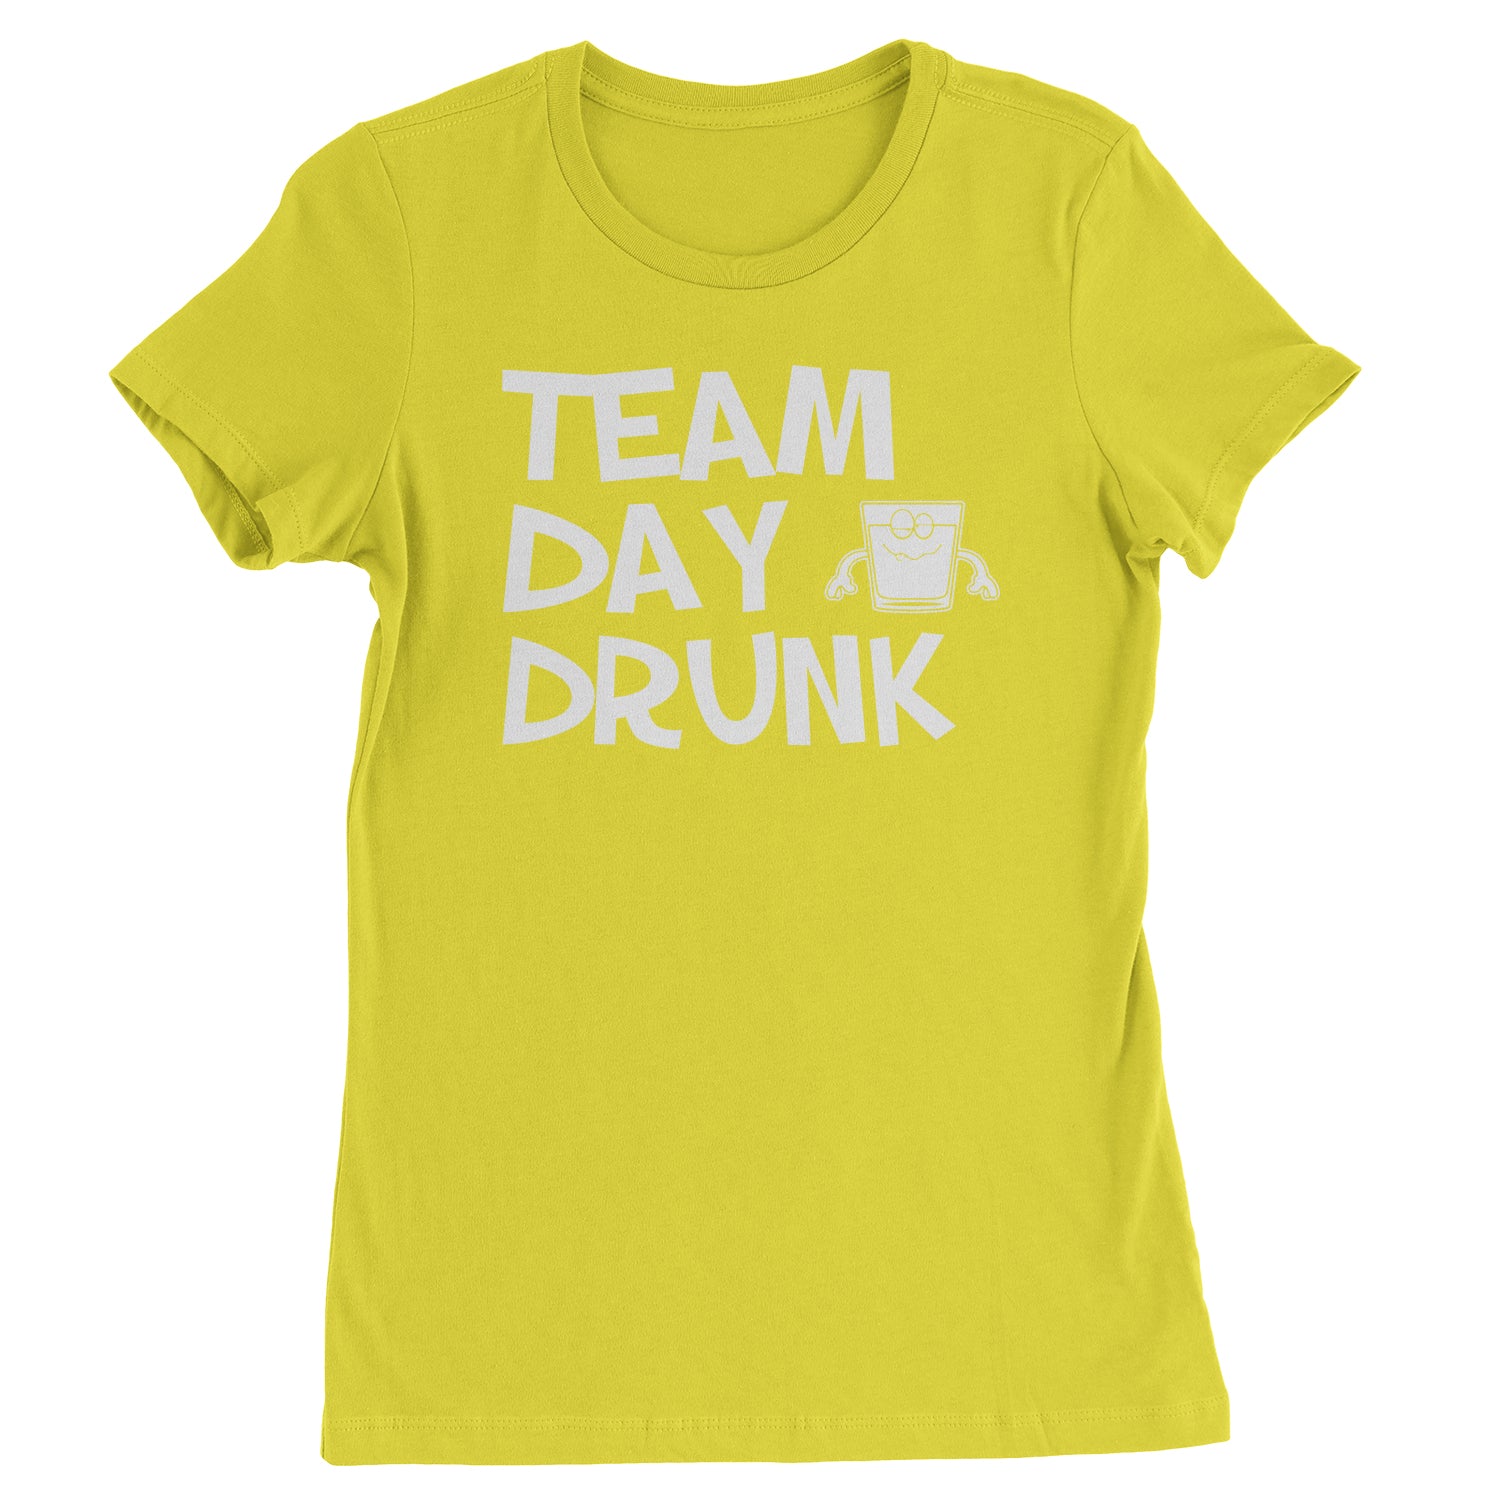 Team Day Drunk Womens T-shirt beer, day, drinking, fun, funday, shots, Sunday, tatsing, wine by Expression Tees